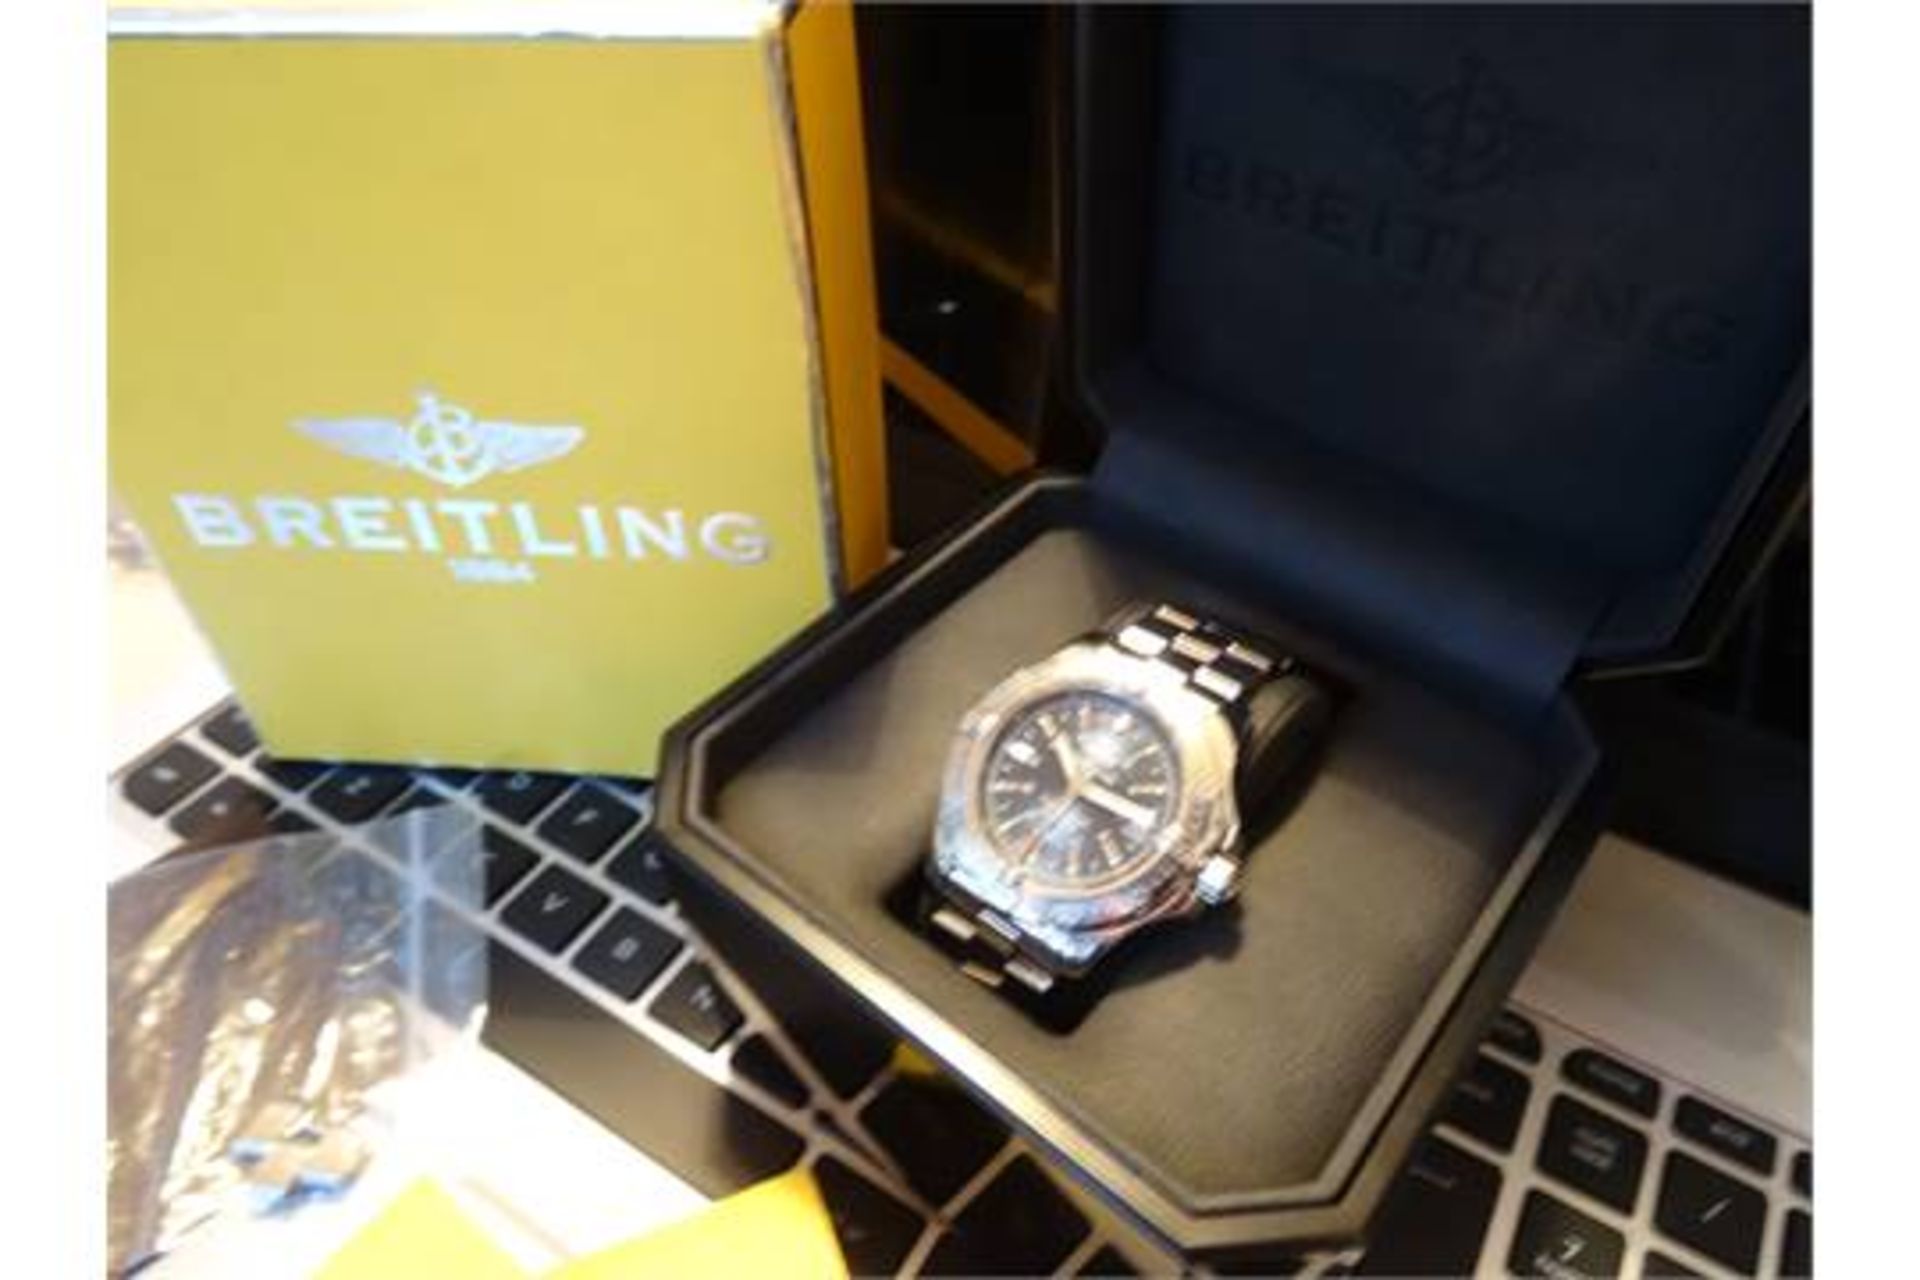 Mens Breitling Colt Chronometre Automatic A17380/C676 Watch FINAL PRICE INCLUDES FREE UK SIGNED - Image 4 of 10